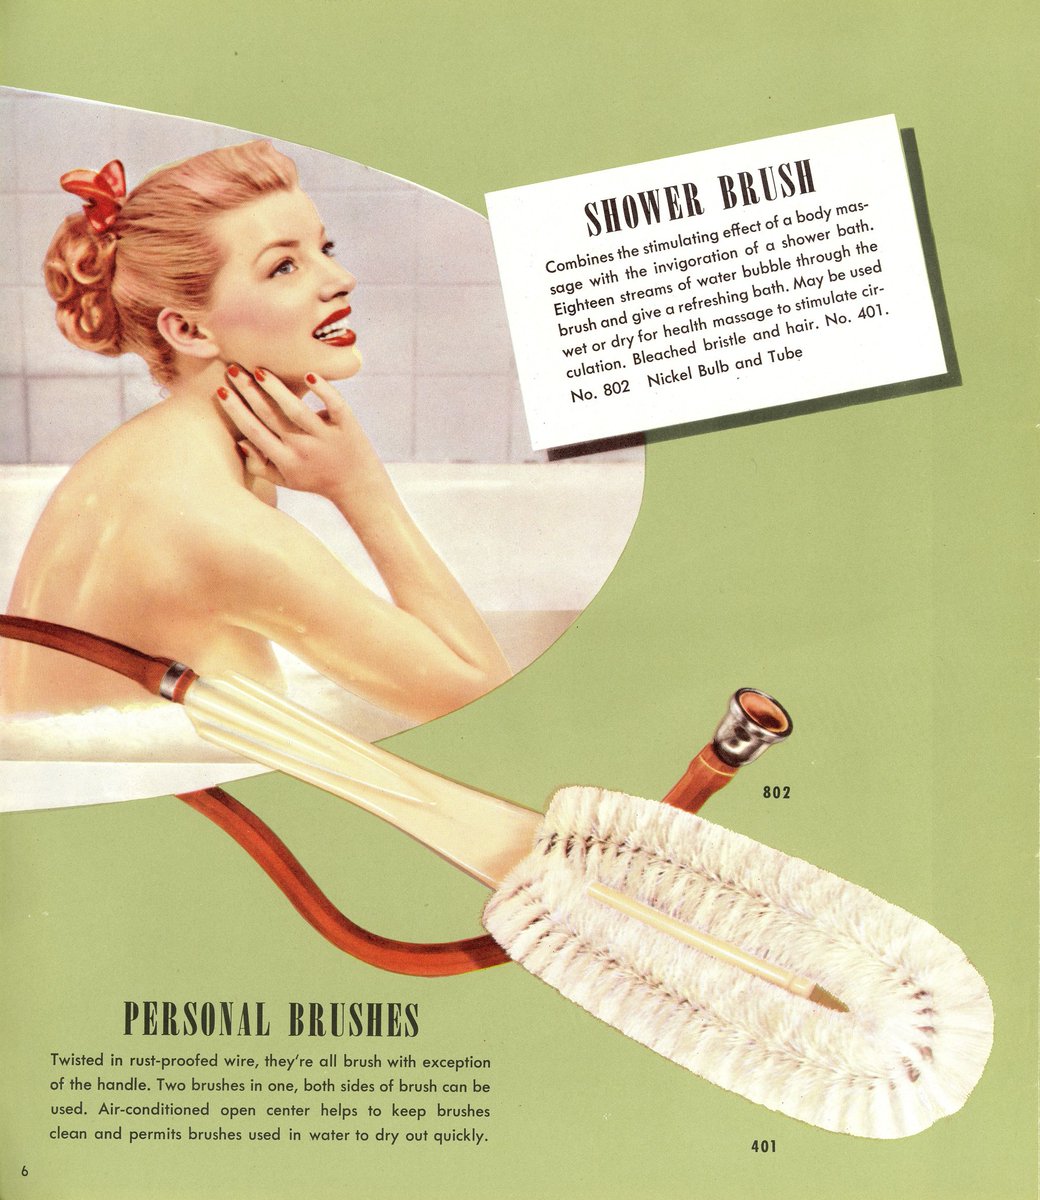 Remember, the  @FullerBrush1906 Shower Brush combines the stimulating effect of a body massage with the invigoration of a *checks notes* shower bath!